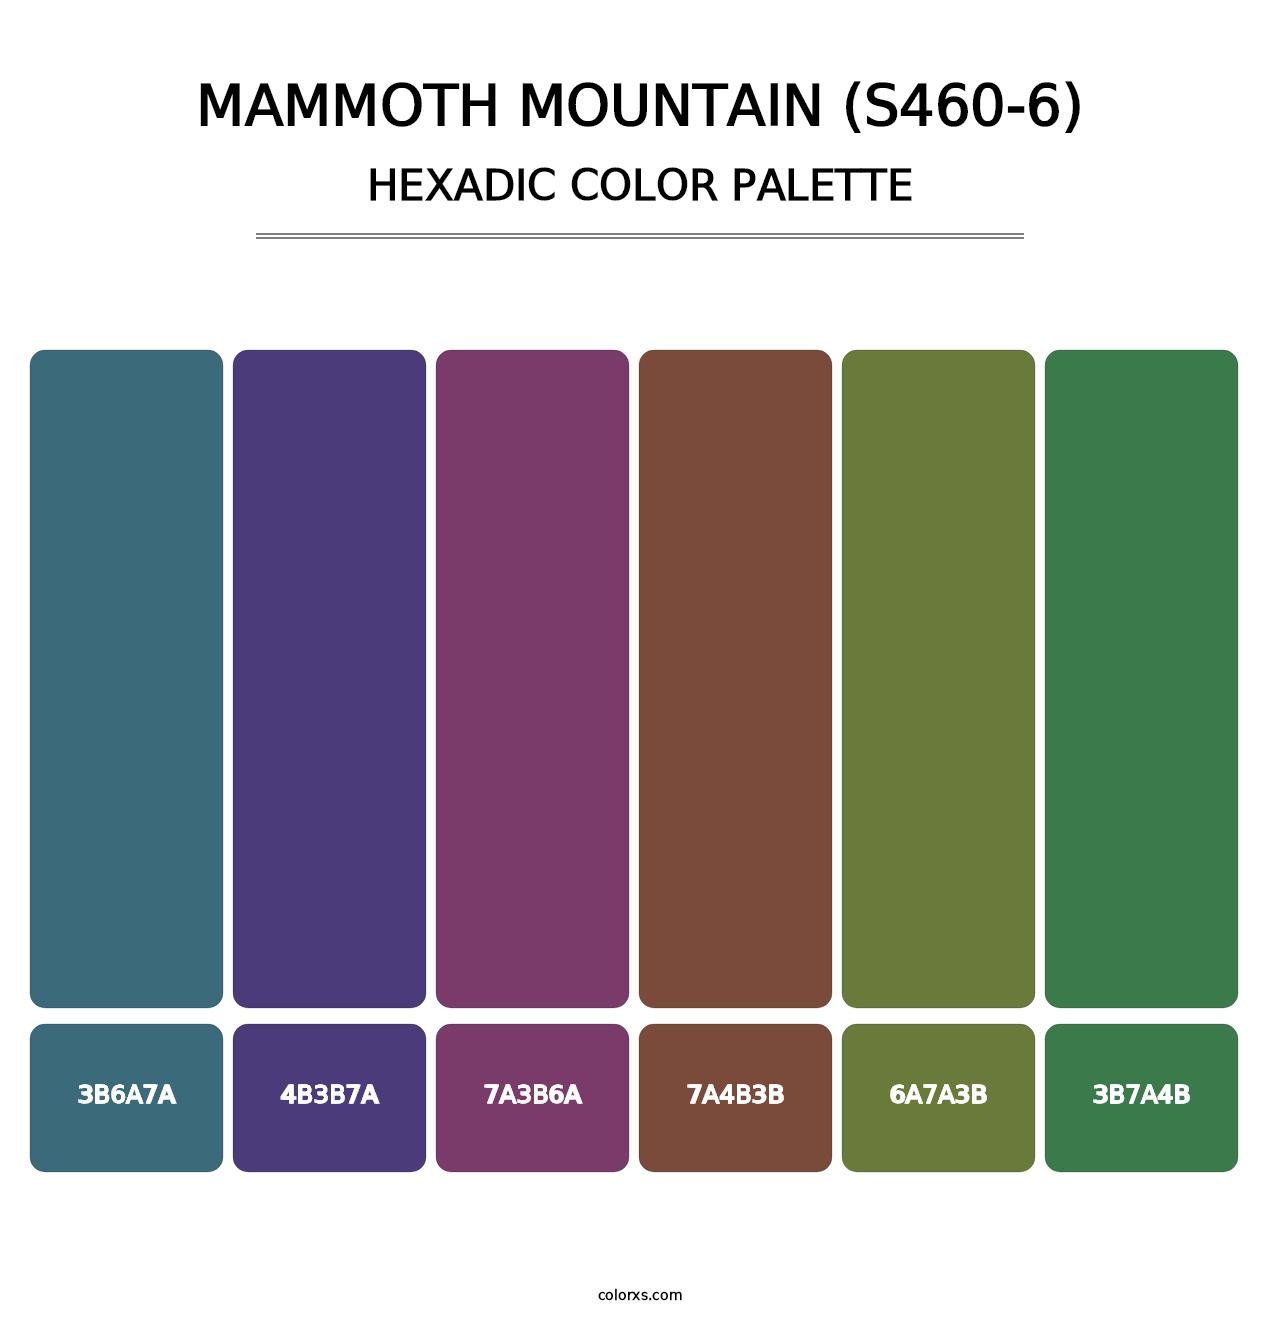 Mammoth Mountain (S460-6) - Hexadic Color Palette